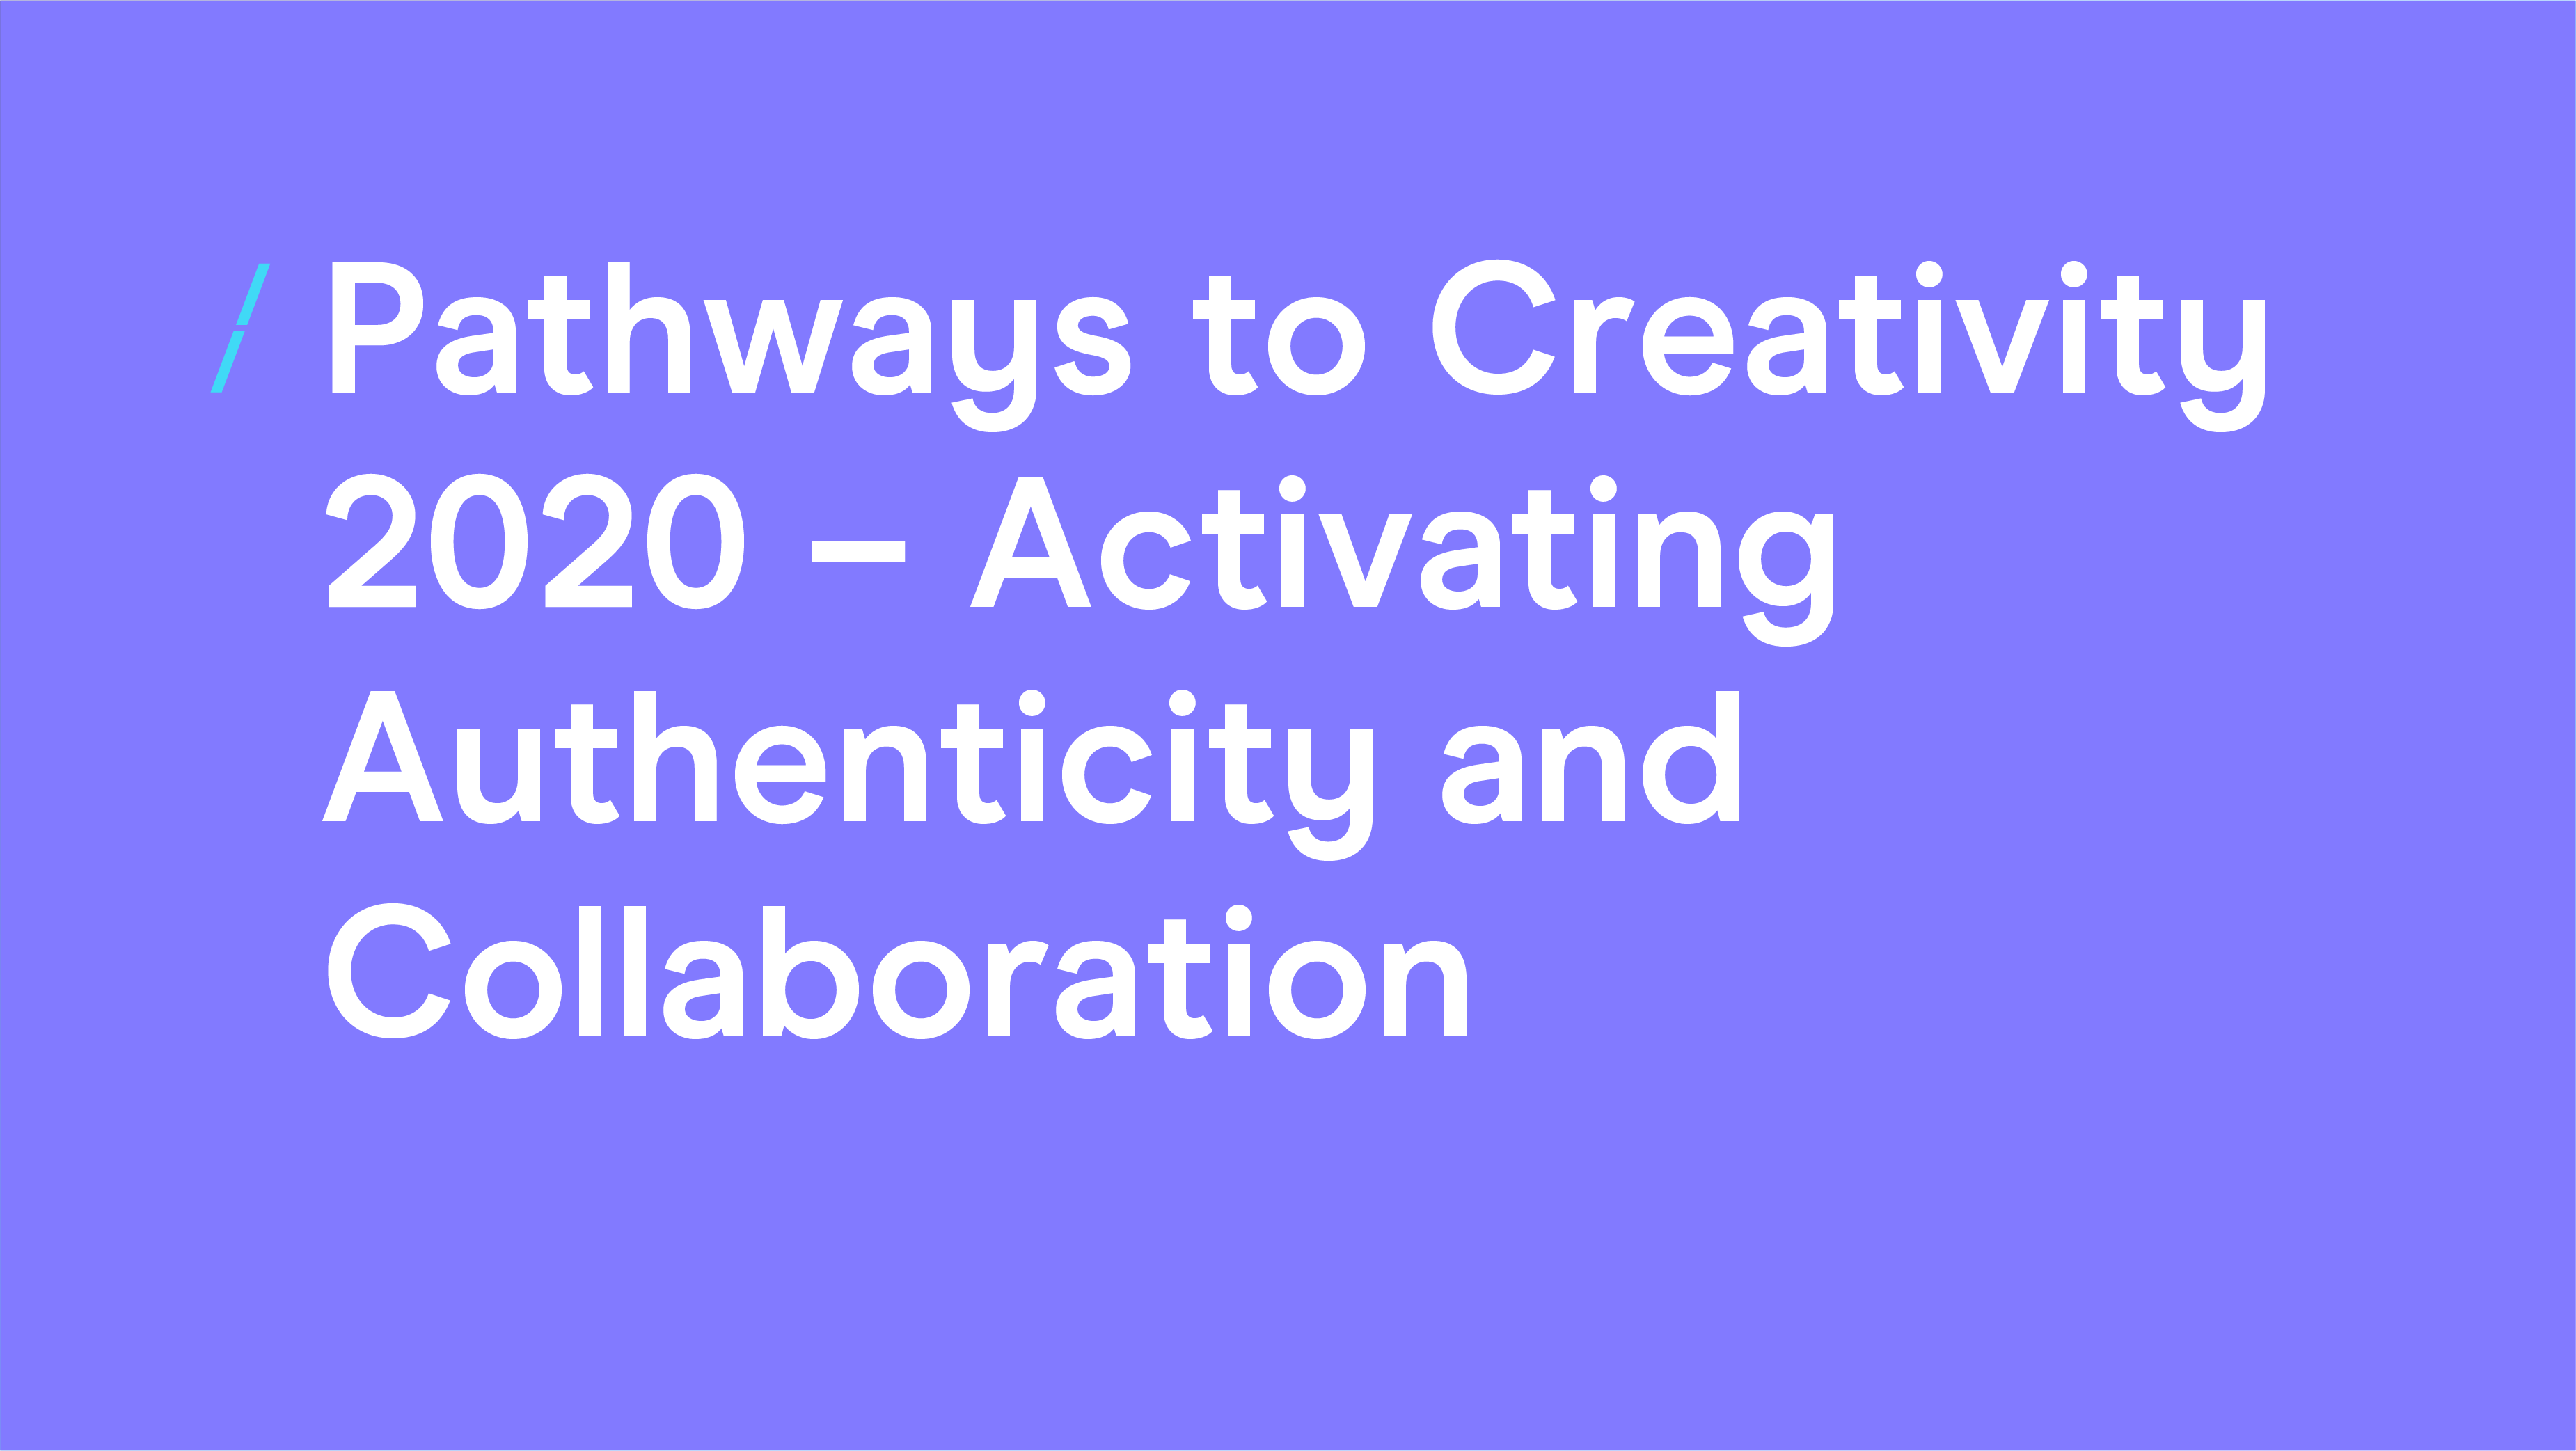 Pathways to Creativity 2020 - Activating Authenticity and Collaboration.png